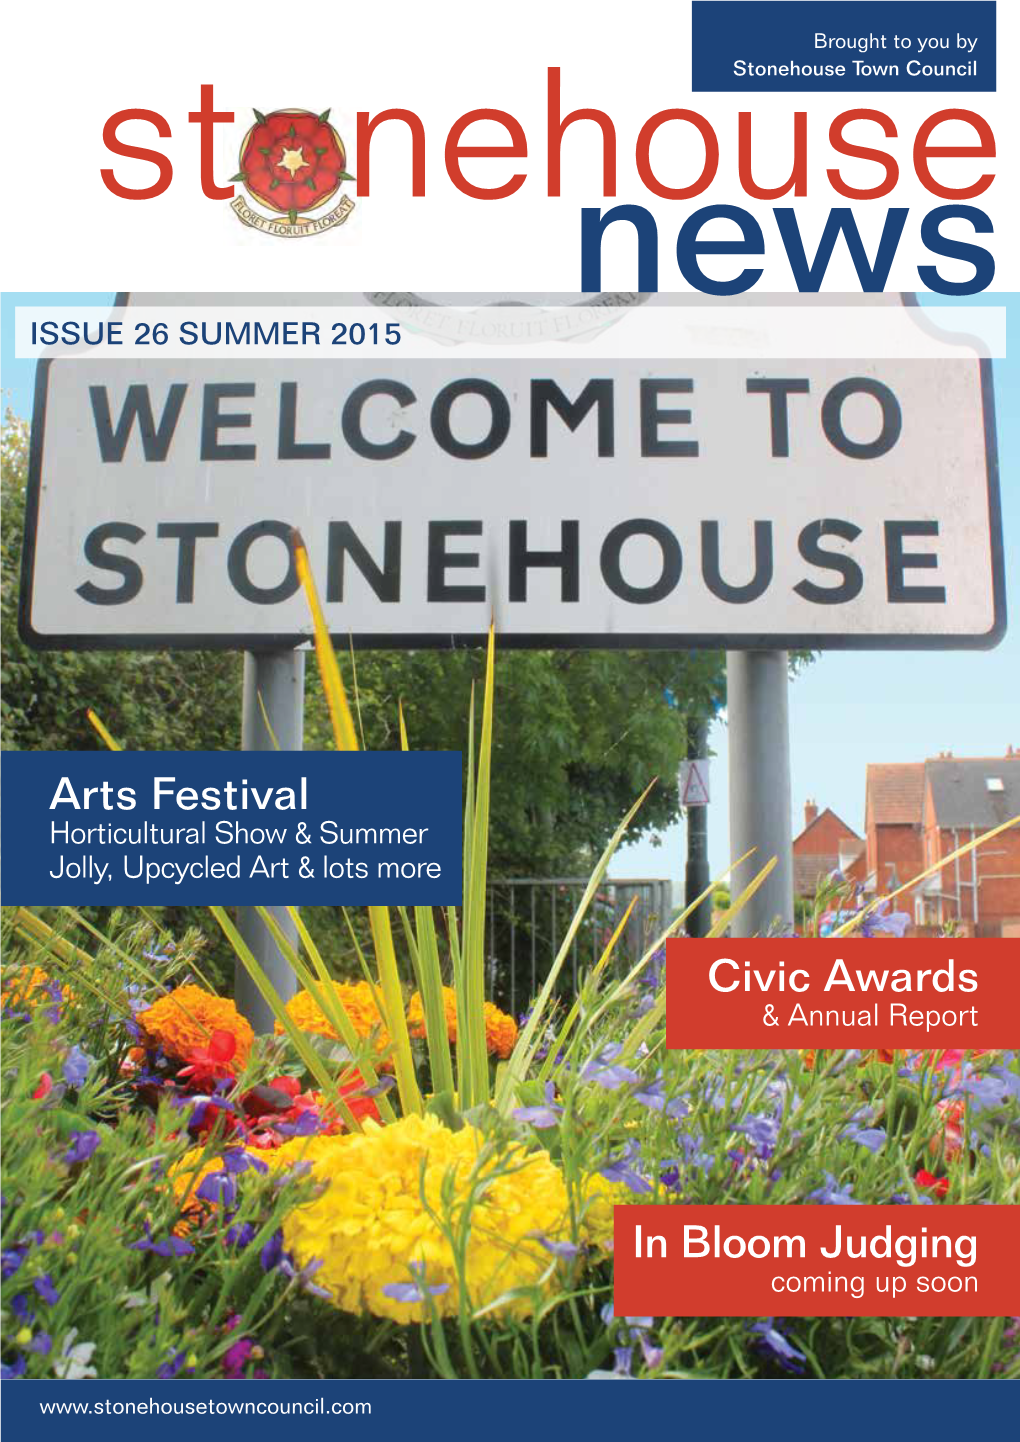 Stonehouse News Issue 26